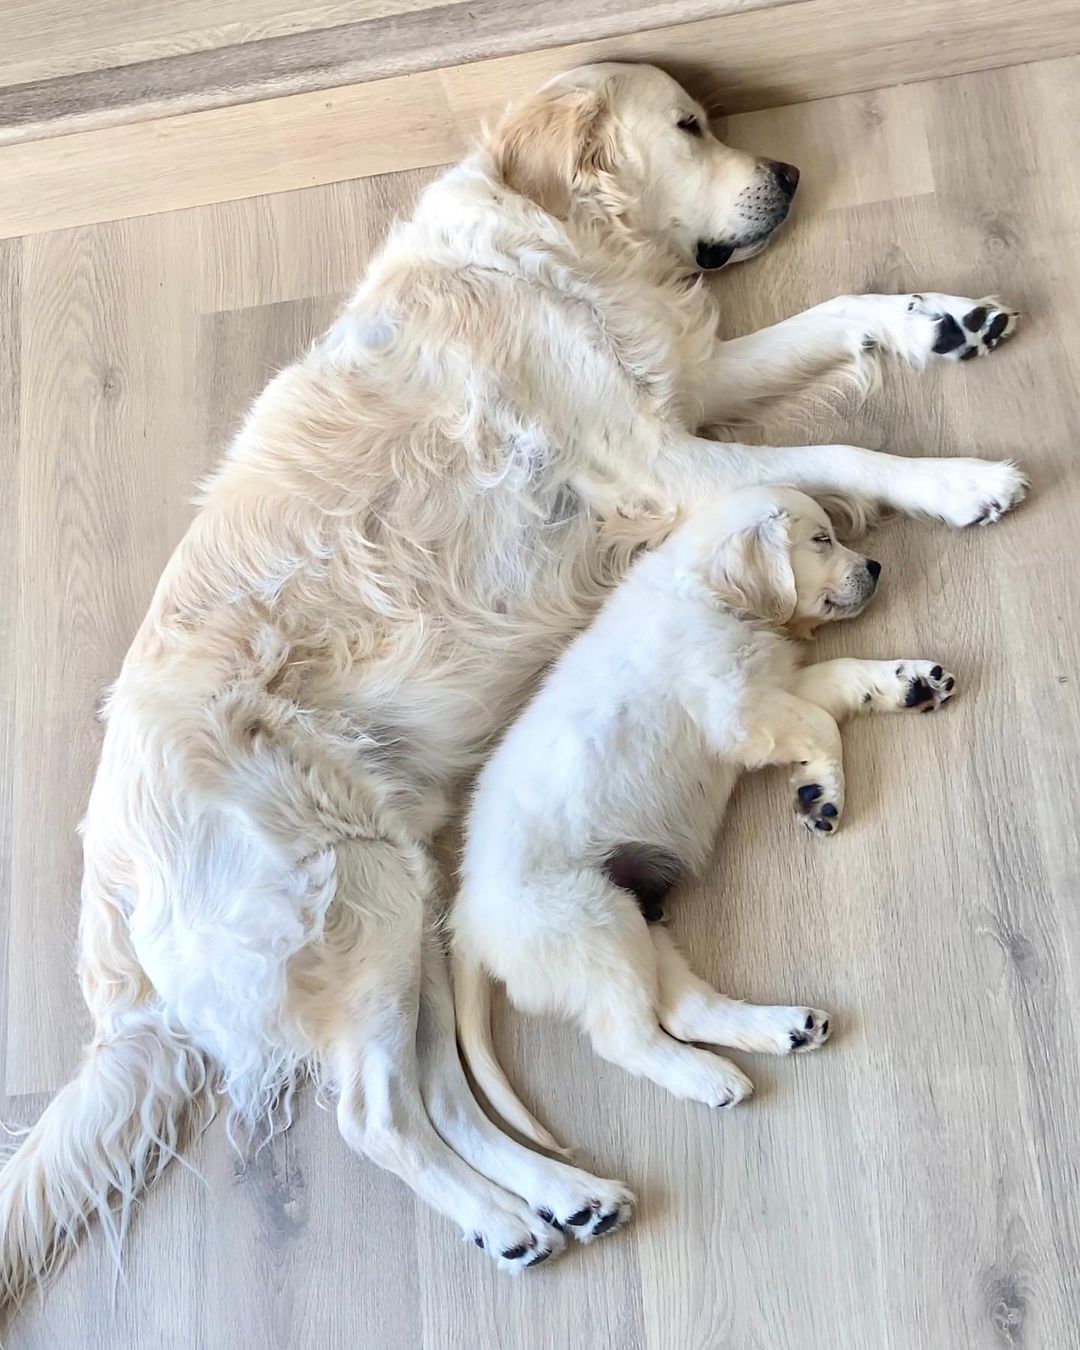 grown golden retriever and puppy lying next to each other